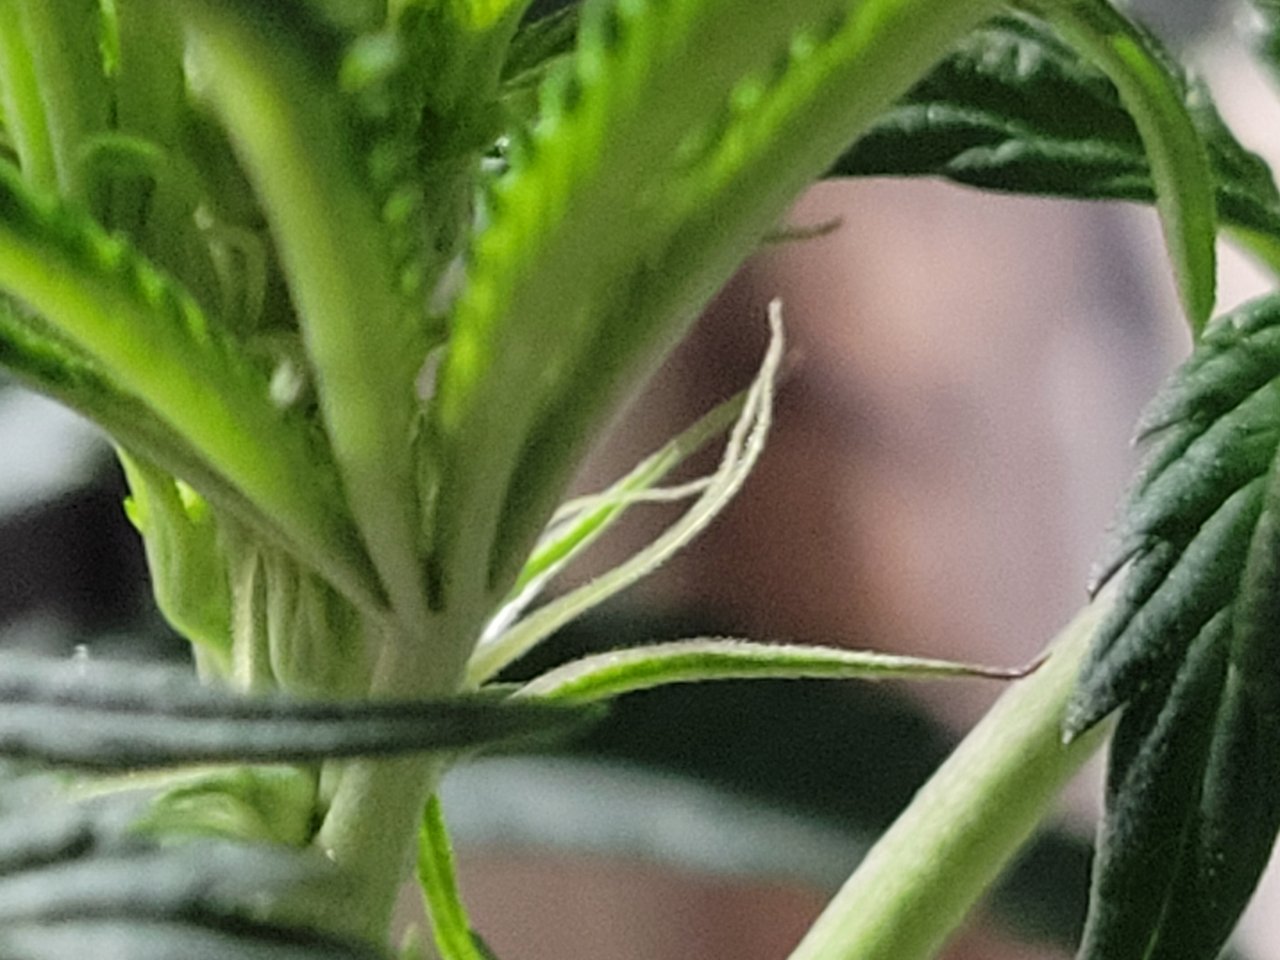 Purple Ghost Candy #1 day 6 flowering - pre flower